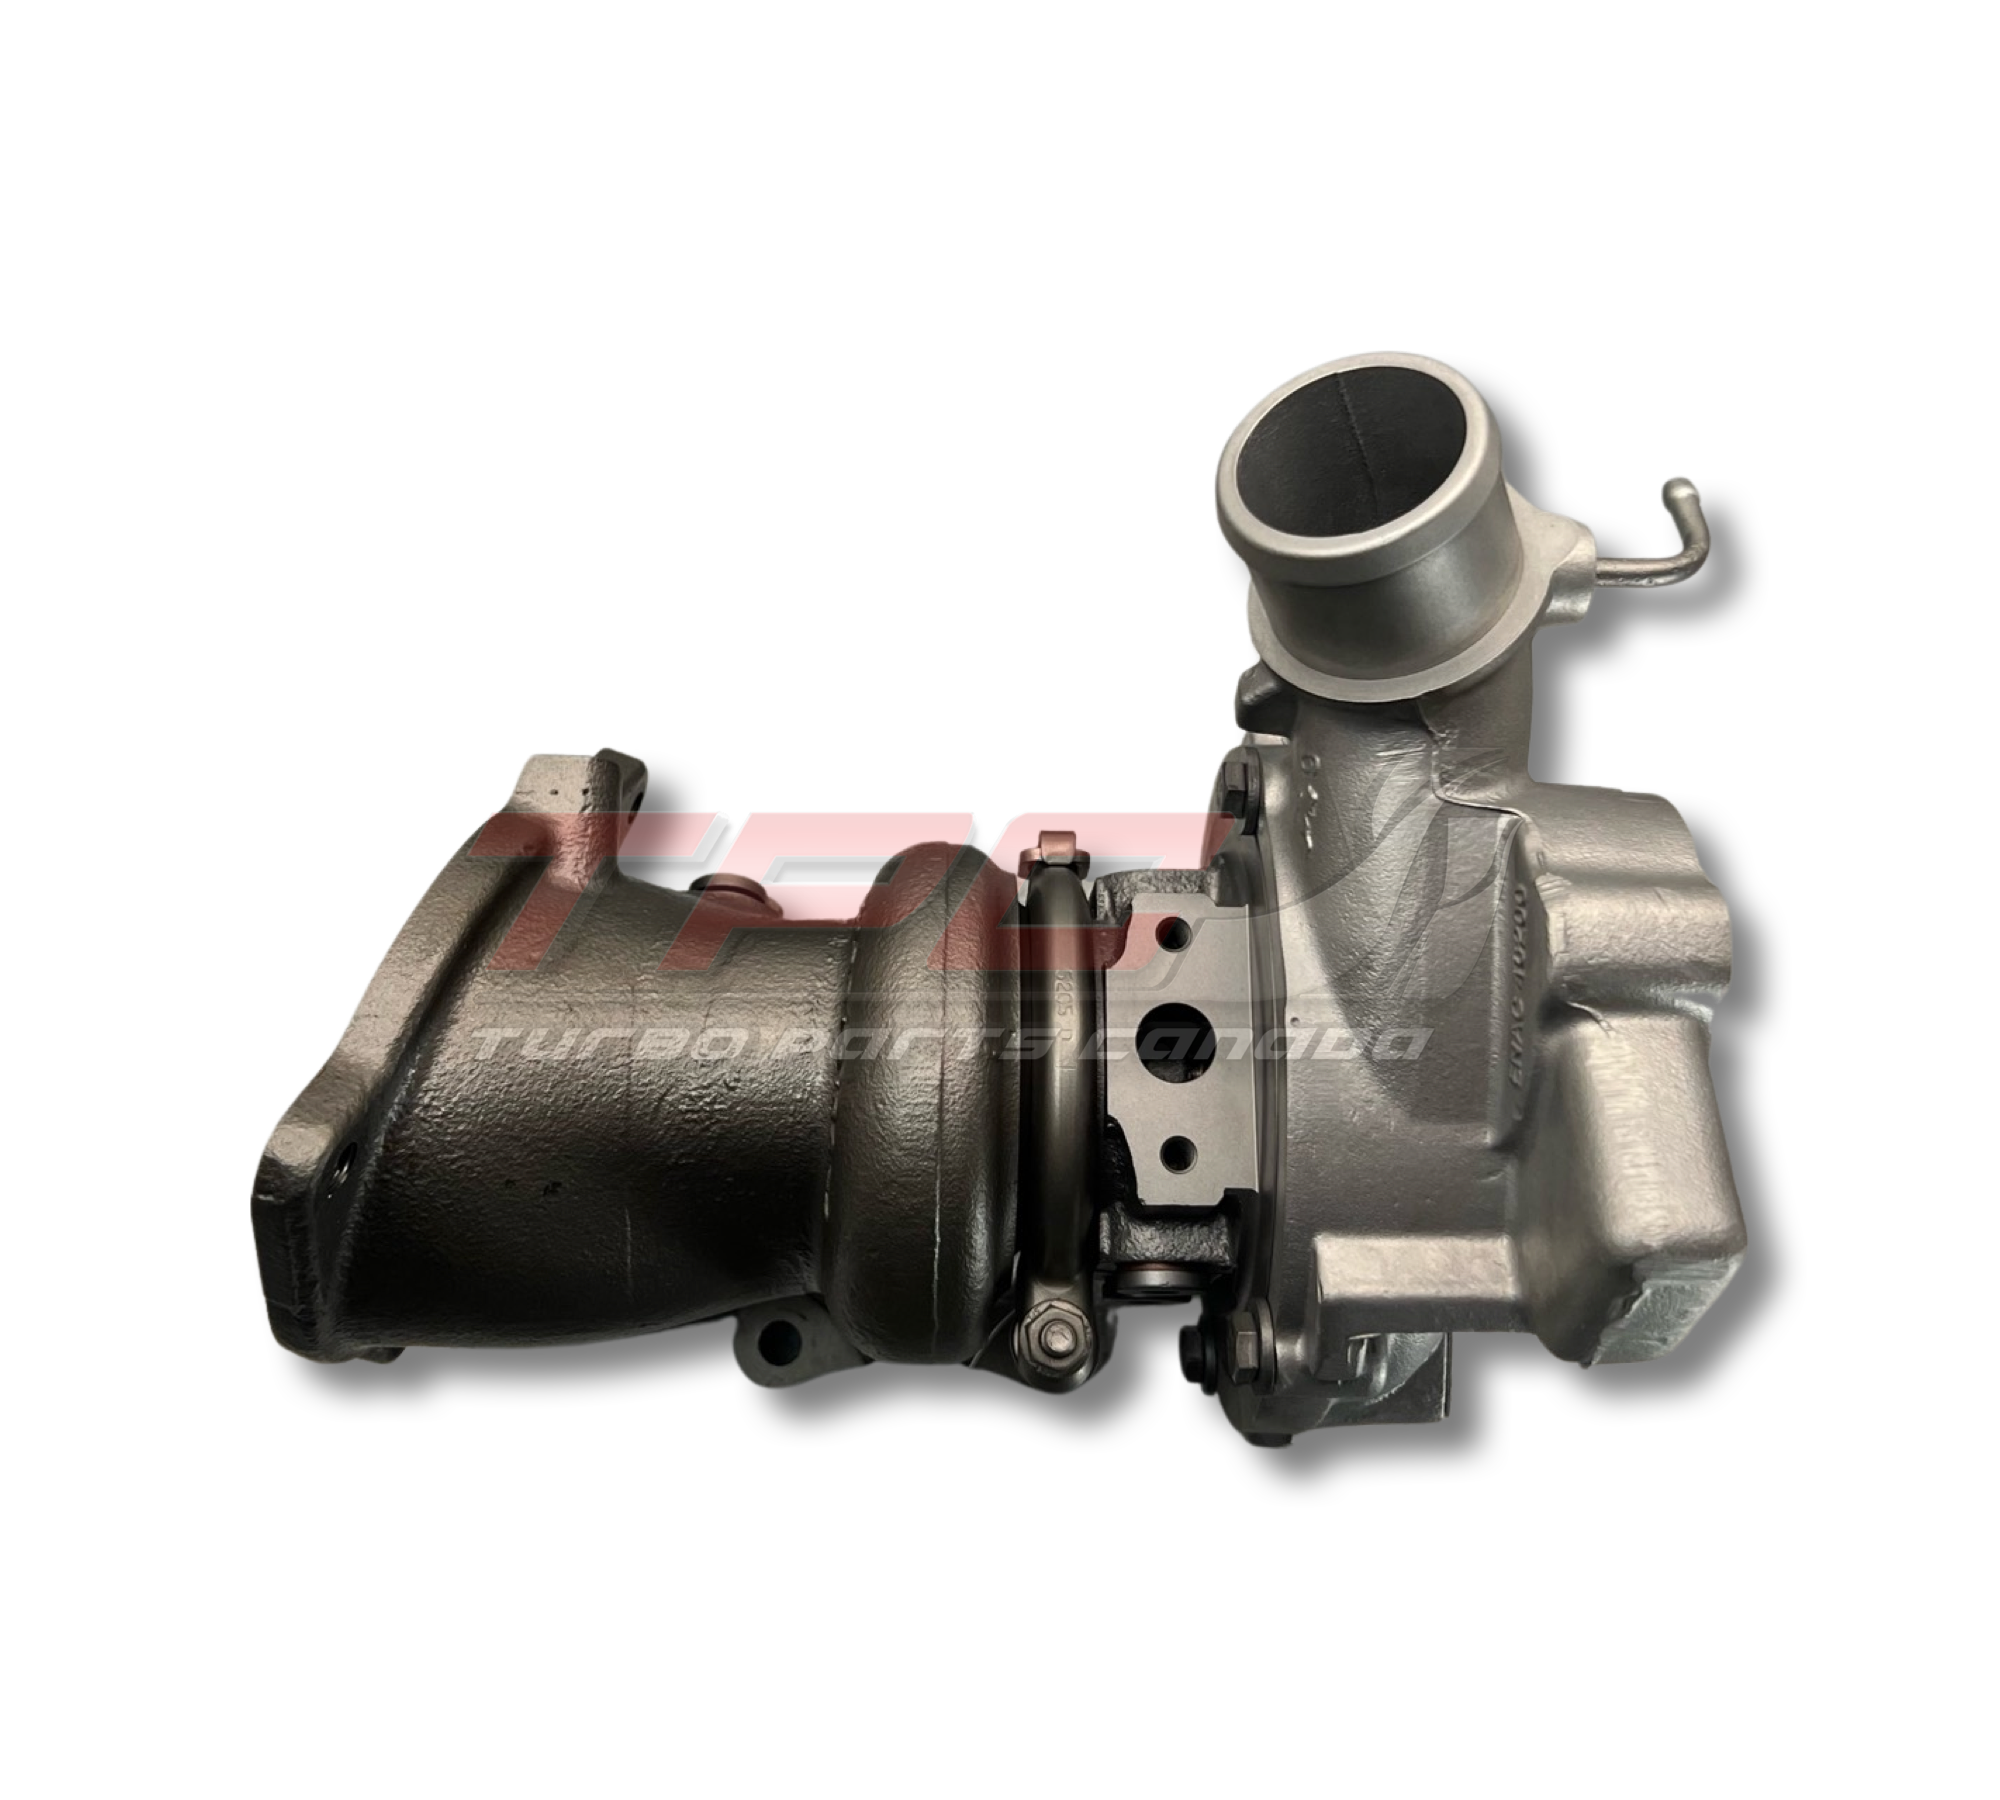 Rebuilt Turbocharger for Ford Ecoboost 1.6L Engine - Turbo Parts Canada Inc. 